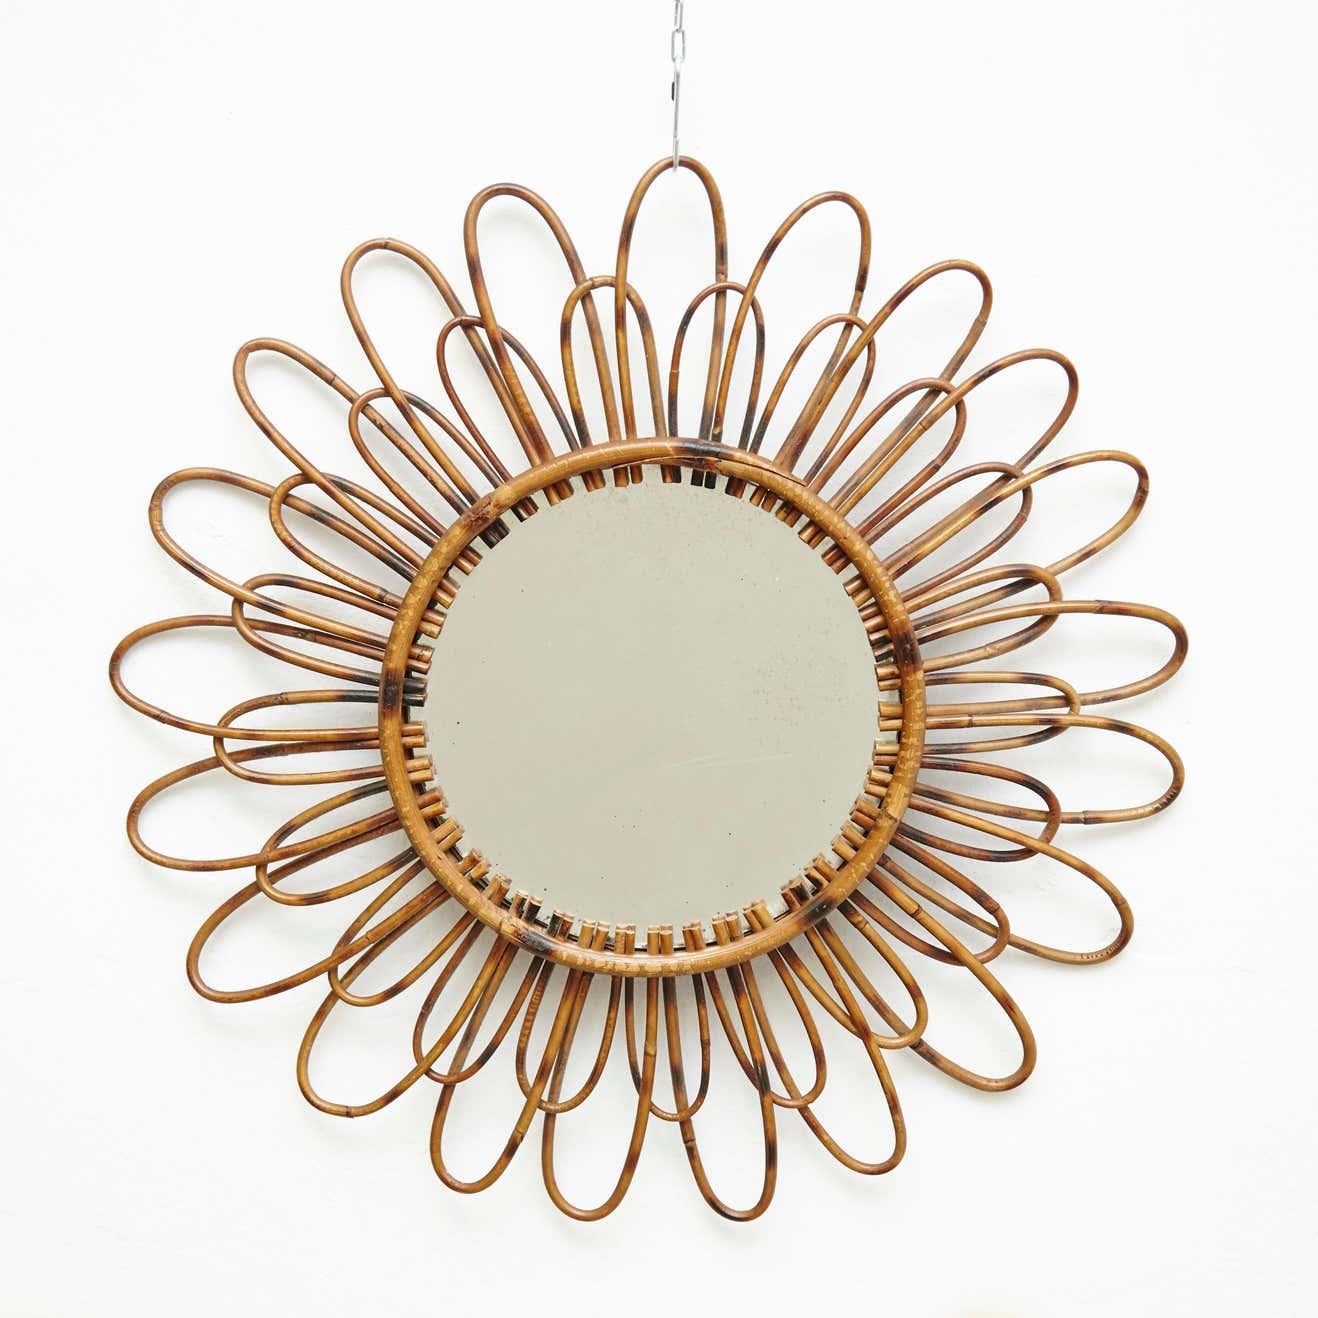 Mid-Century Modern French Handcrafted Rattan Wall Mirror - Circa 1960

Add a touch of vintage charm to your home with this Mid-Century Modern French handcrafted rattan wall mirror, created by an unknown artisan circa 1960. Its unique design and